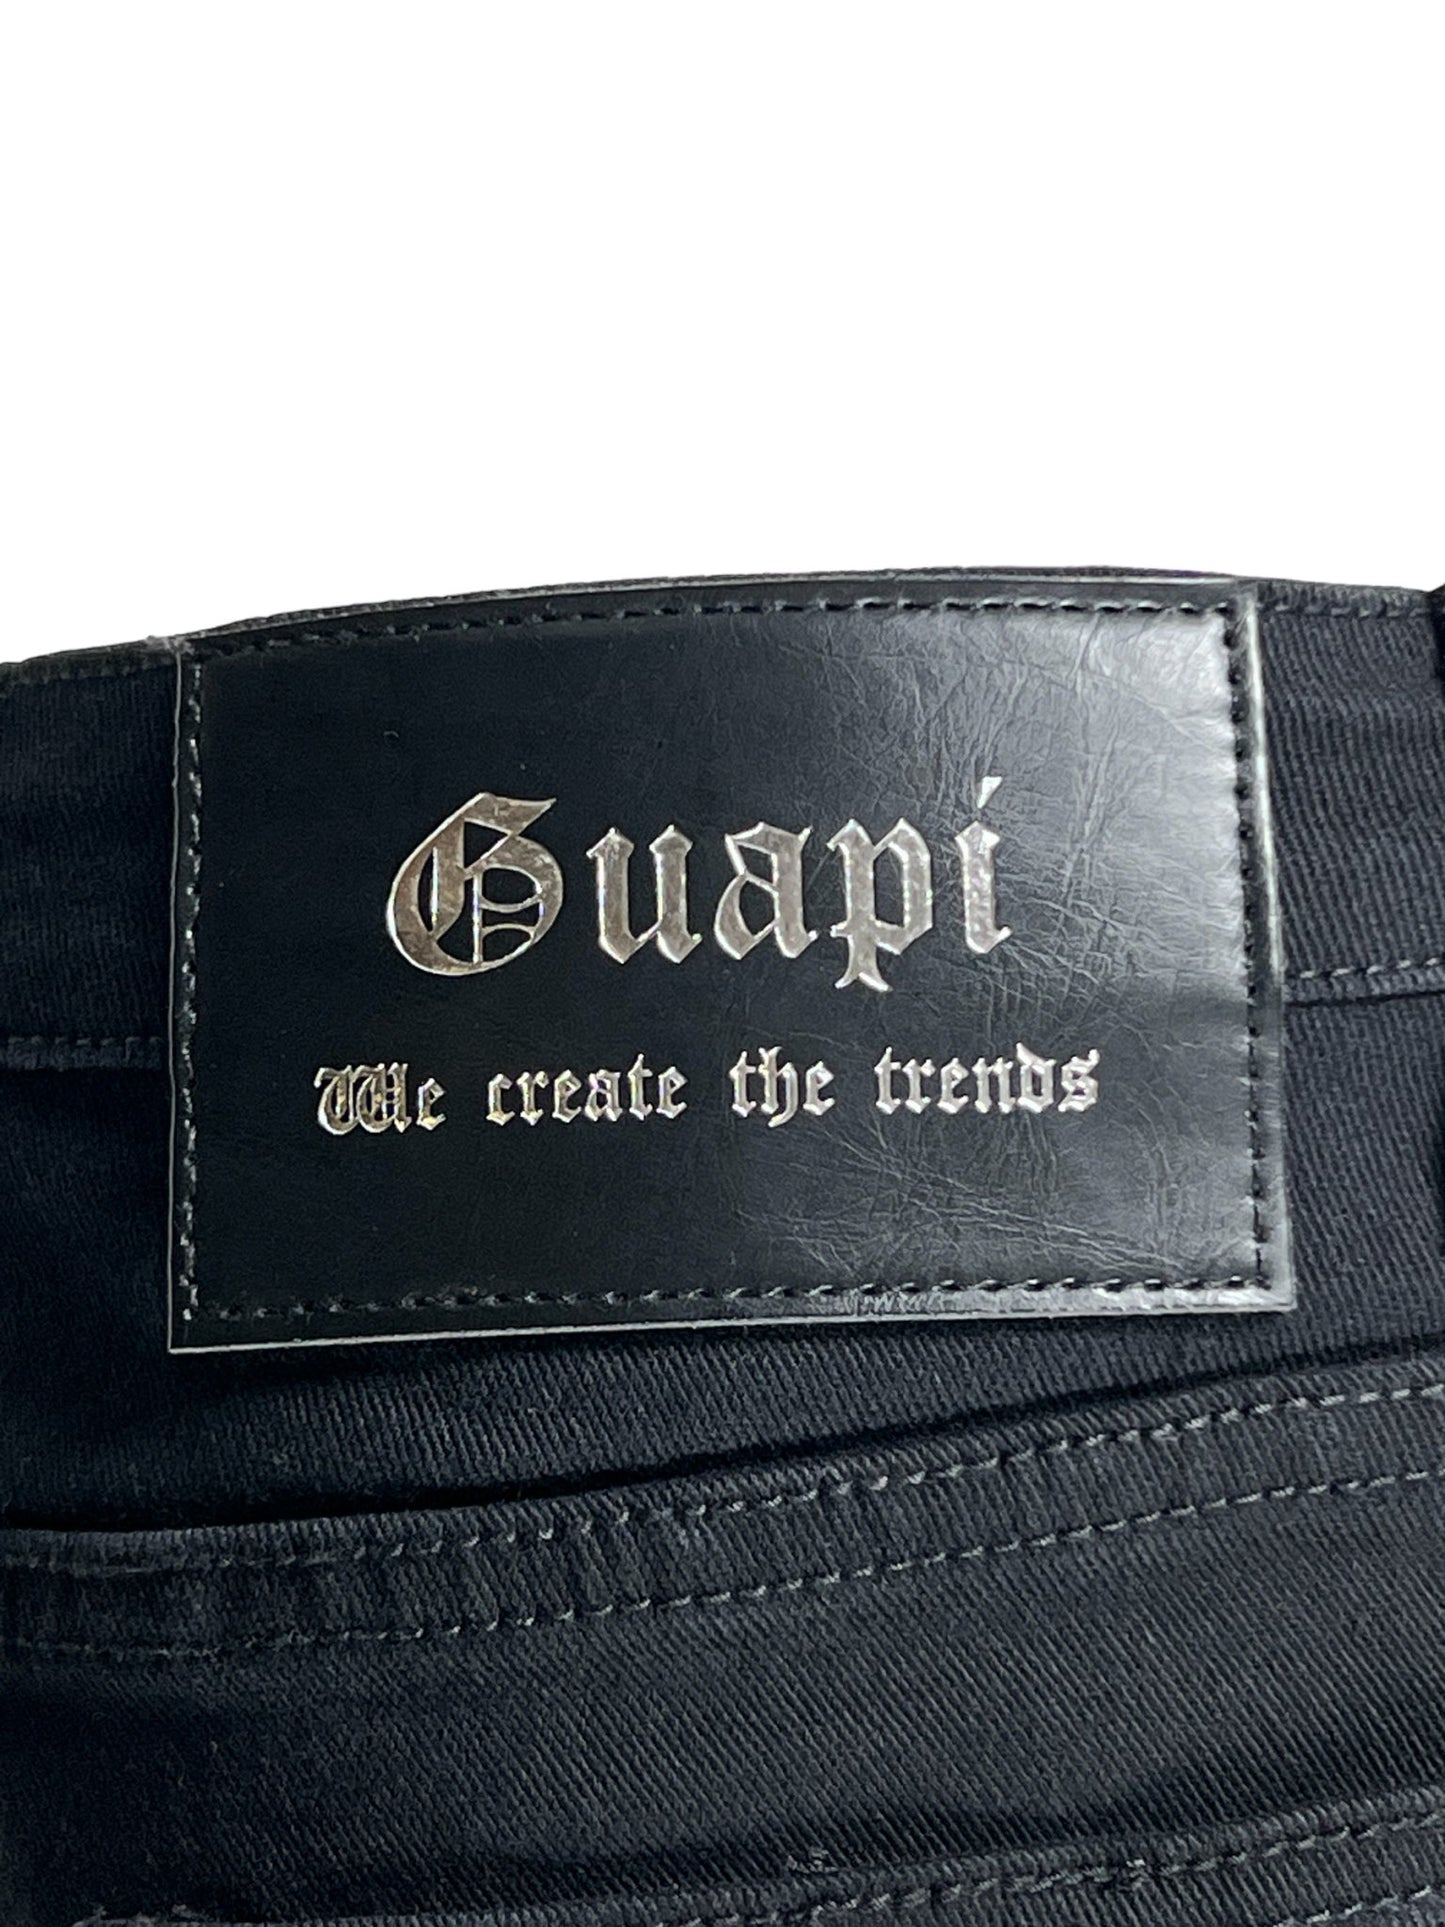 A close-up of a black leather label with the embossed text "GUAPI" and the slogan "we create the trends" on GUAPI Obsidian Black Blood Diamond Stacked Denim.